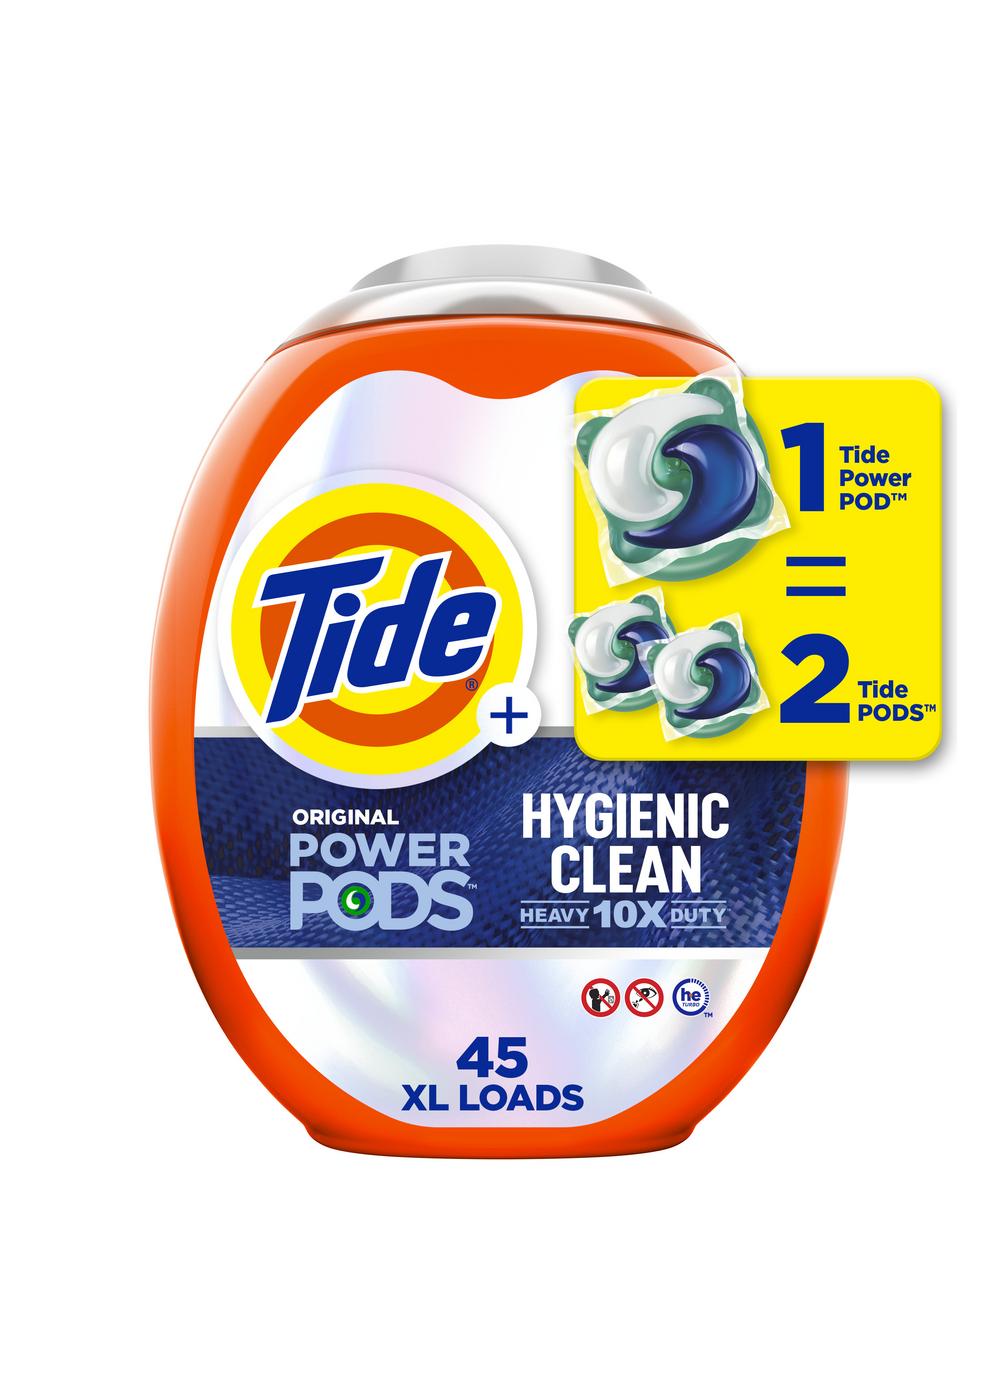 Tide Power PODS Hygienic Clean Heavy Duty Original HE Laundry Detergent; image 1 of 10